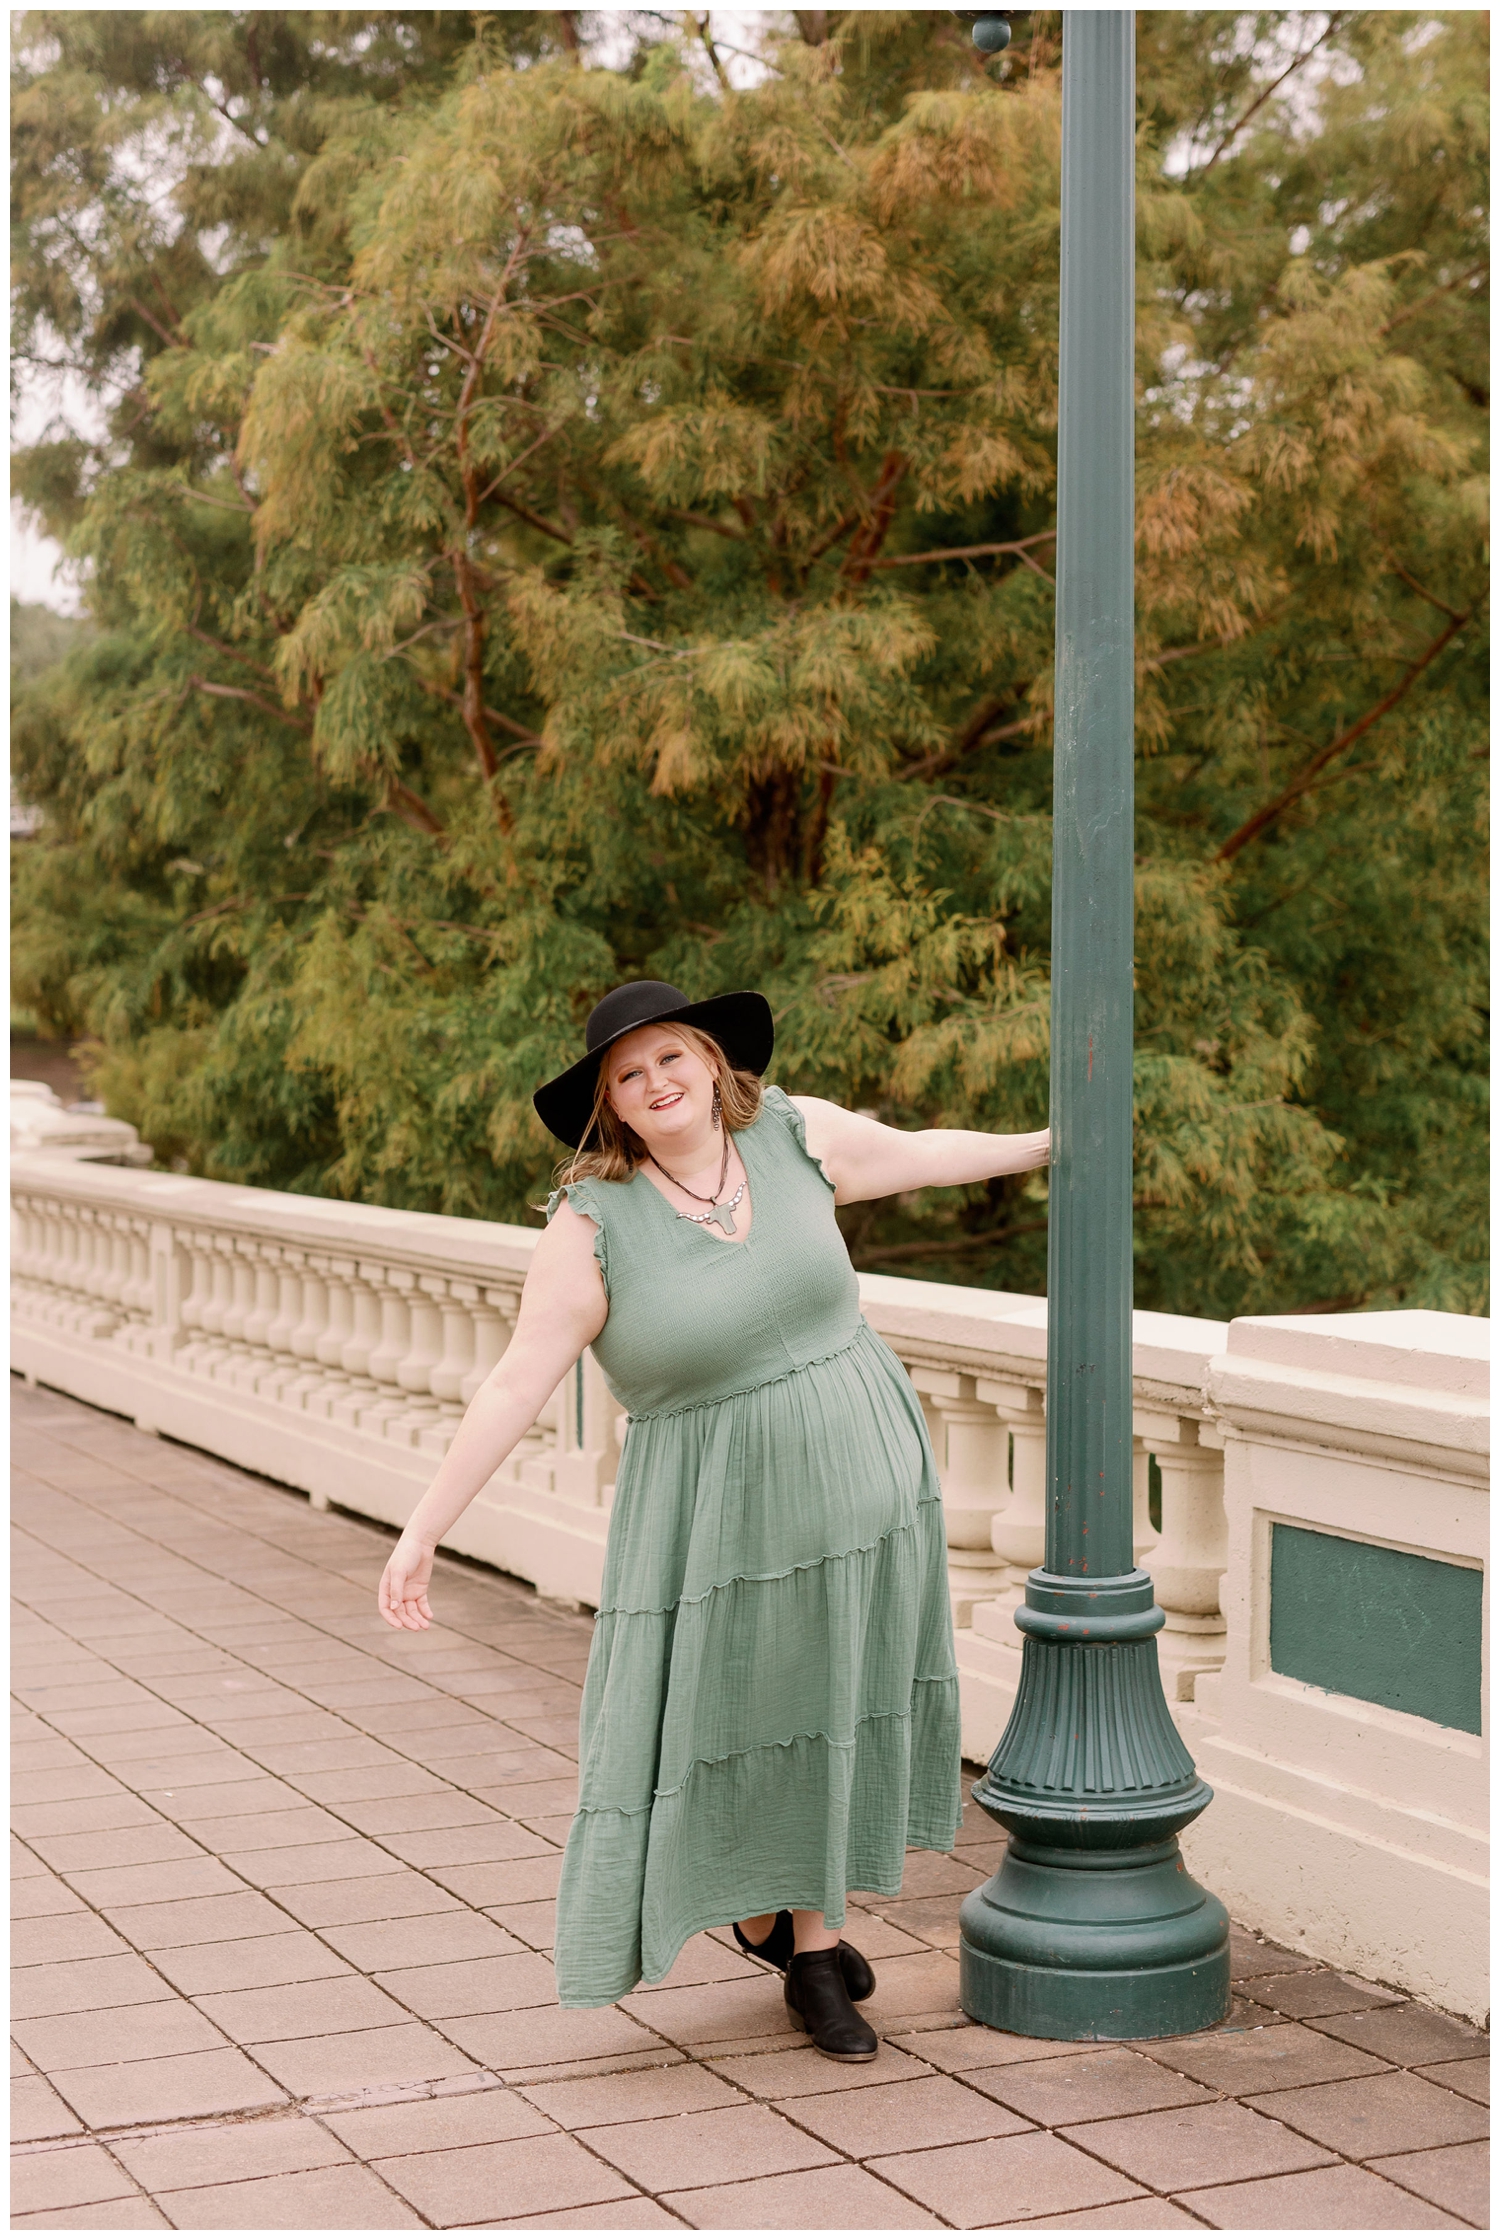 Sabine Street Bridge with high school senior leaning on lamp post in sage green sundress and black hat